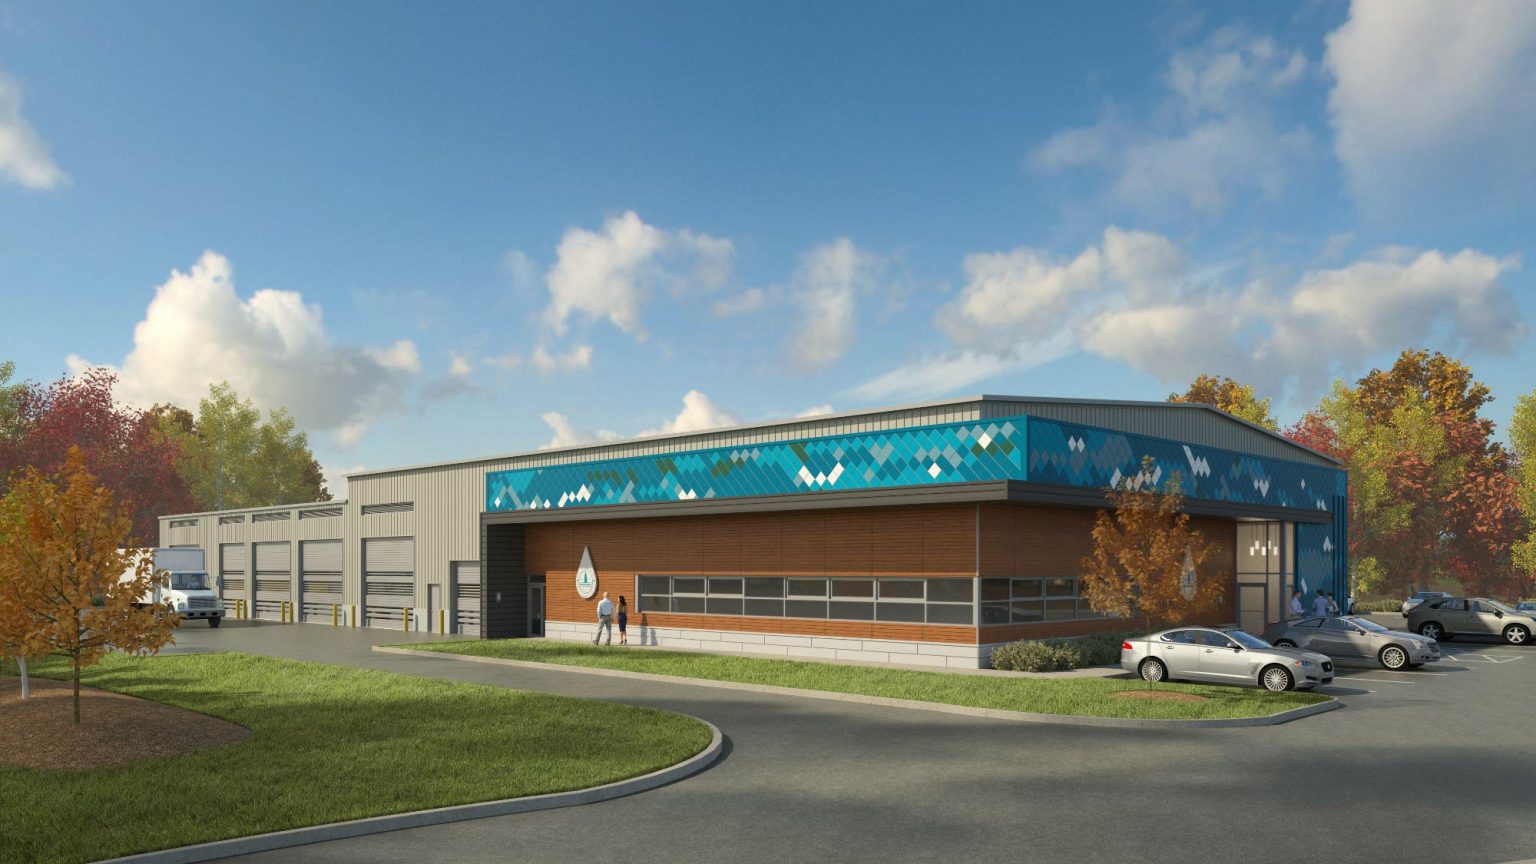 Building Design for Fall River Water Department Central Operations Facility in Fall River, MA: a consolidation of multiple existing facilities throughout the city into one new central location